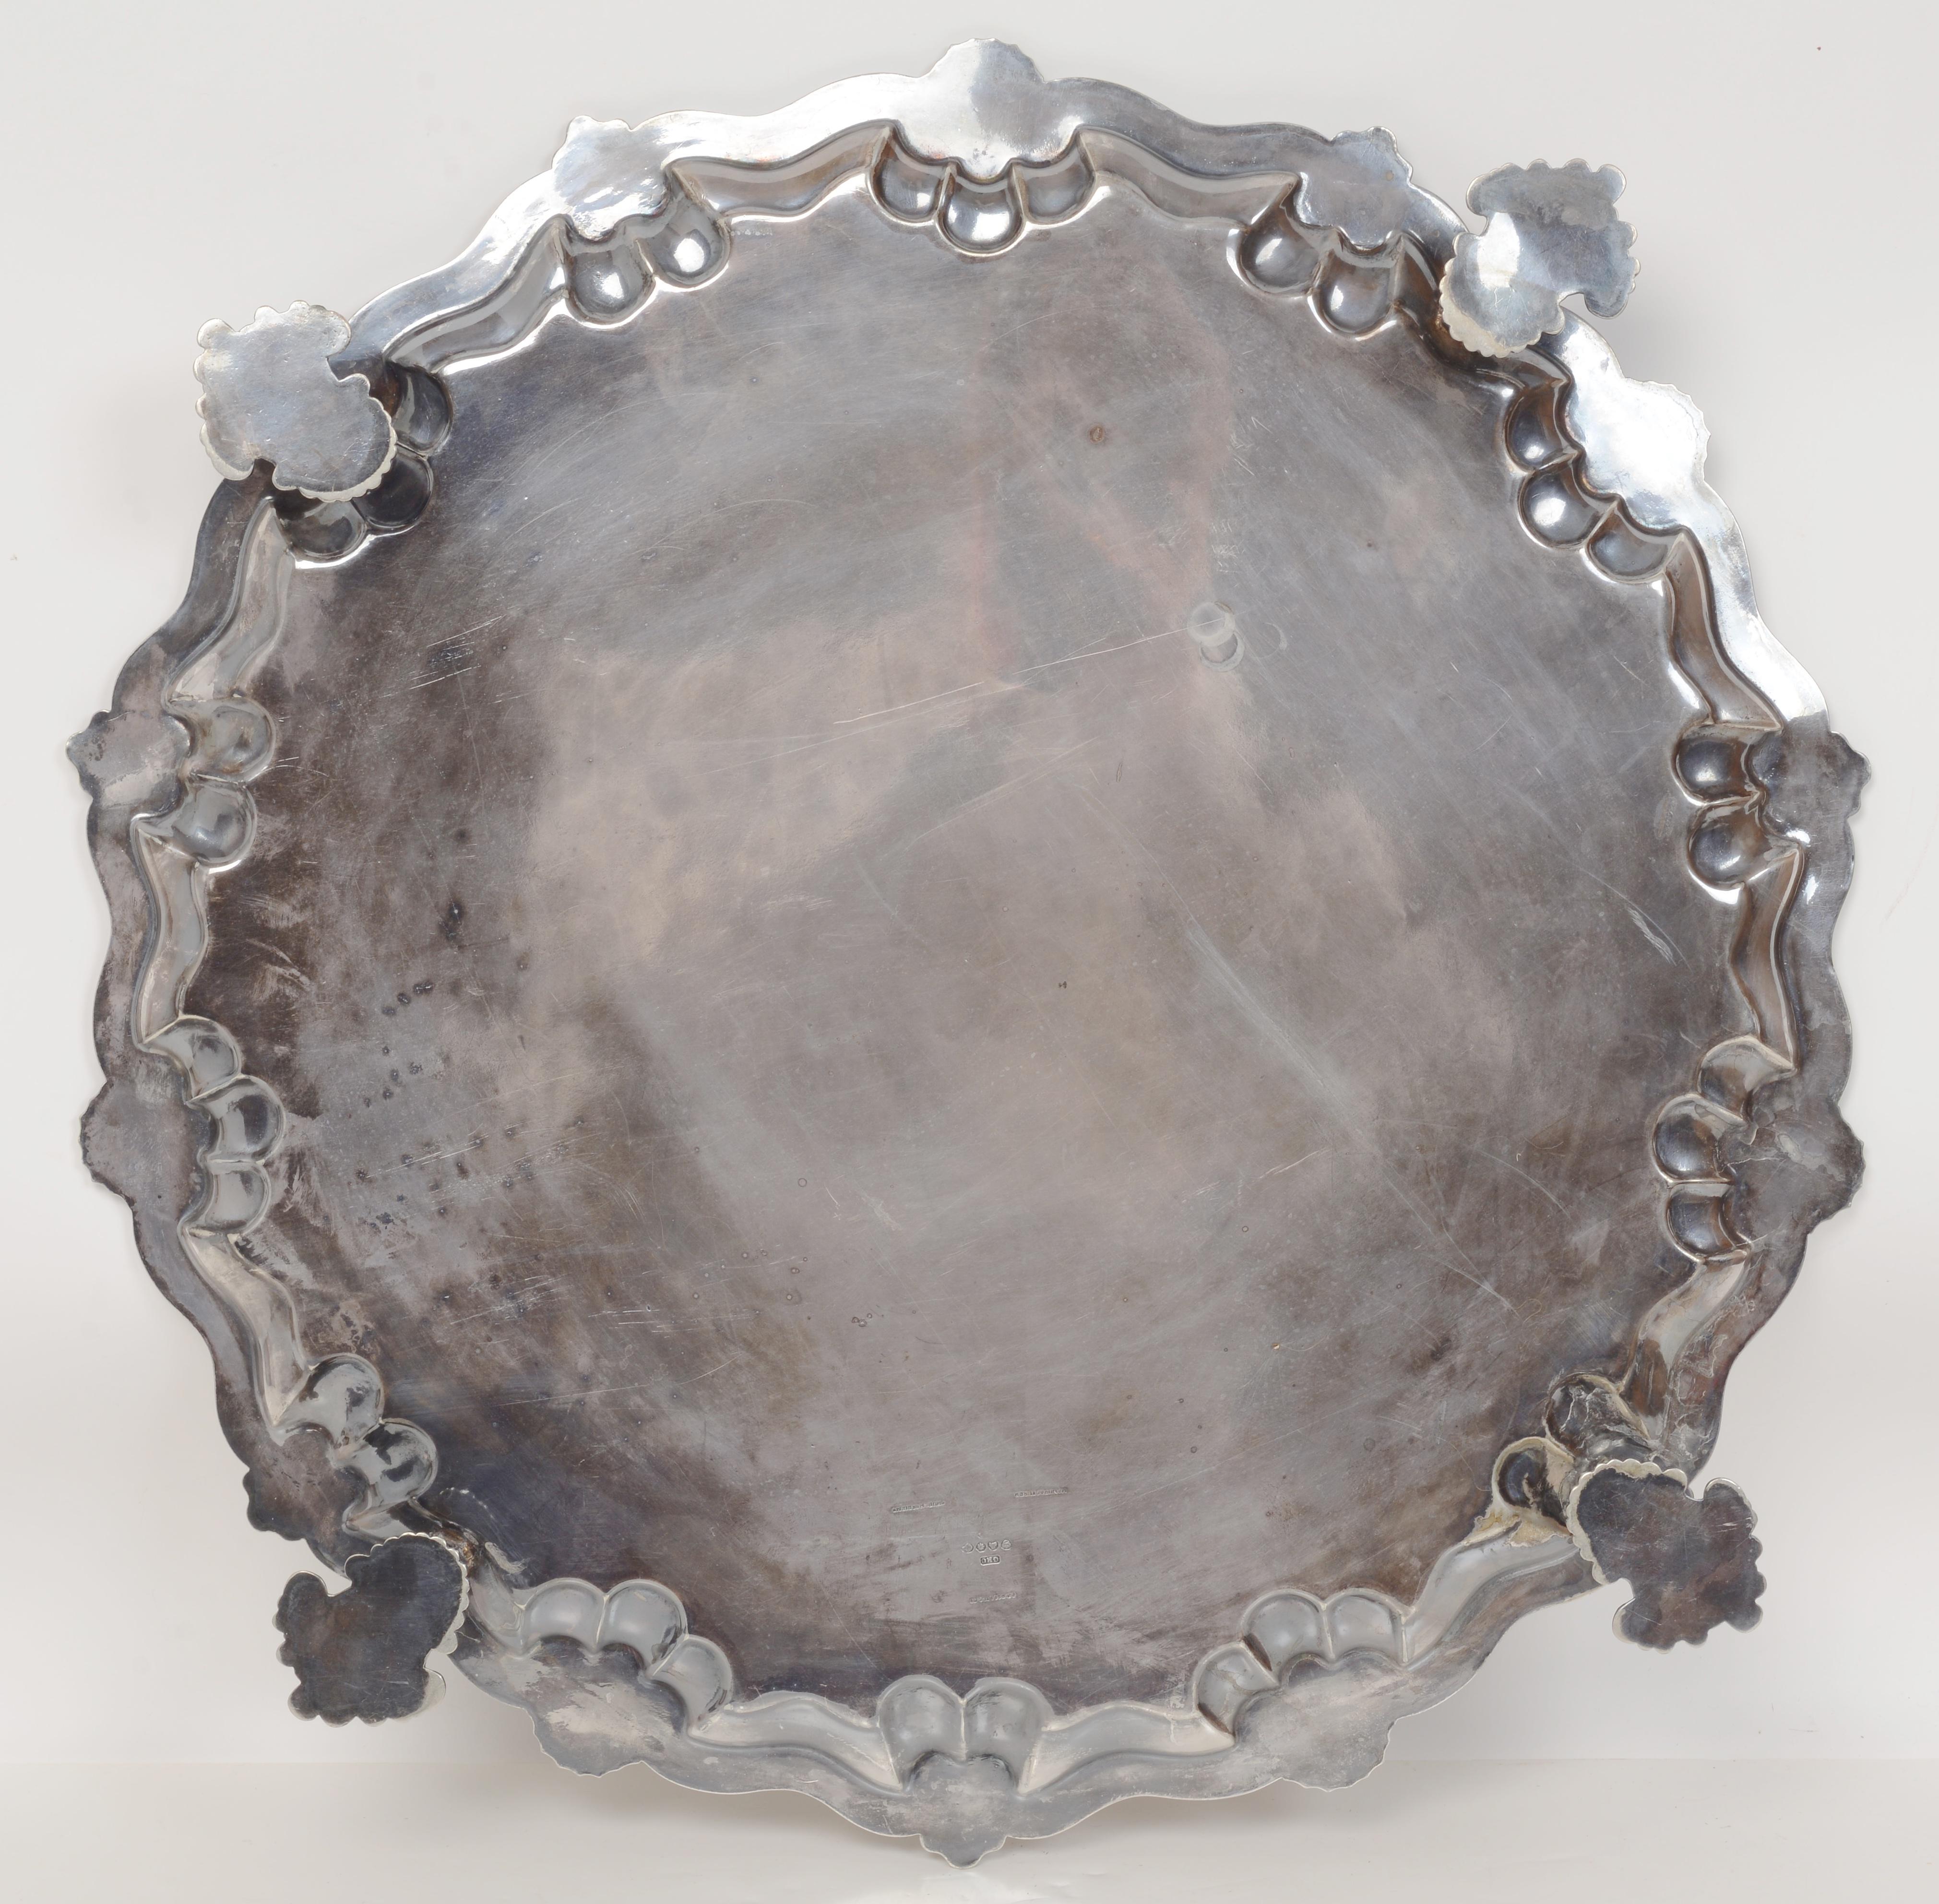 Very Large and Important Silver Plated Salver by Collis & Co. c1835. Maker's mark of George Richmond Collis the highly sought after silversmith. Sir Edward Thomason (1769-1849) was a dominant figure in the Birmingham silver industry. In 1835